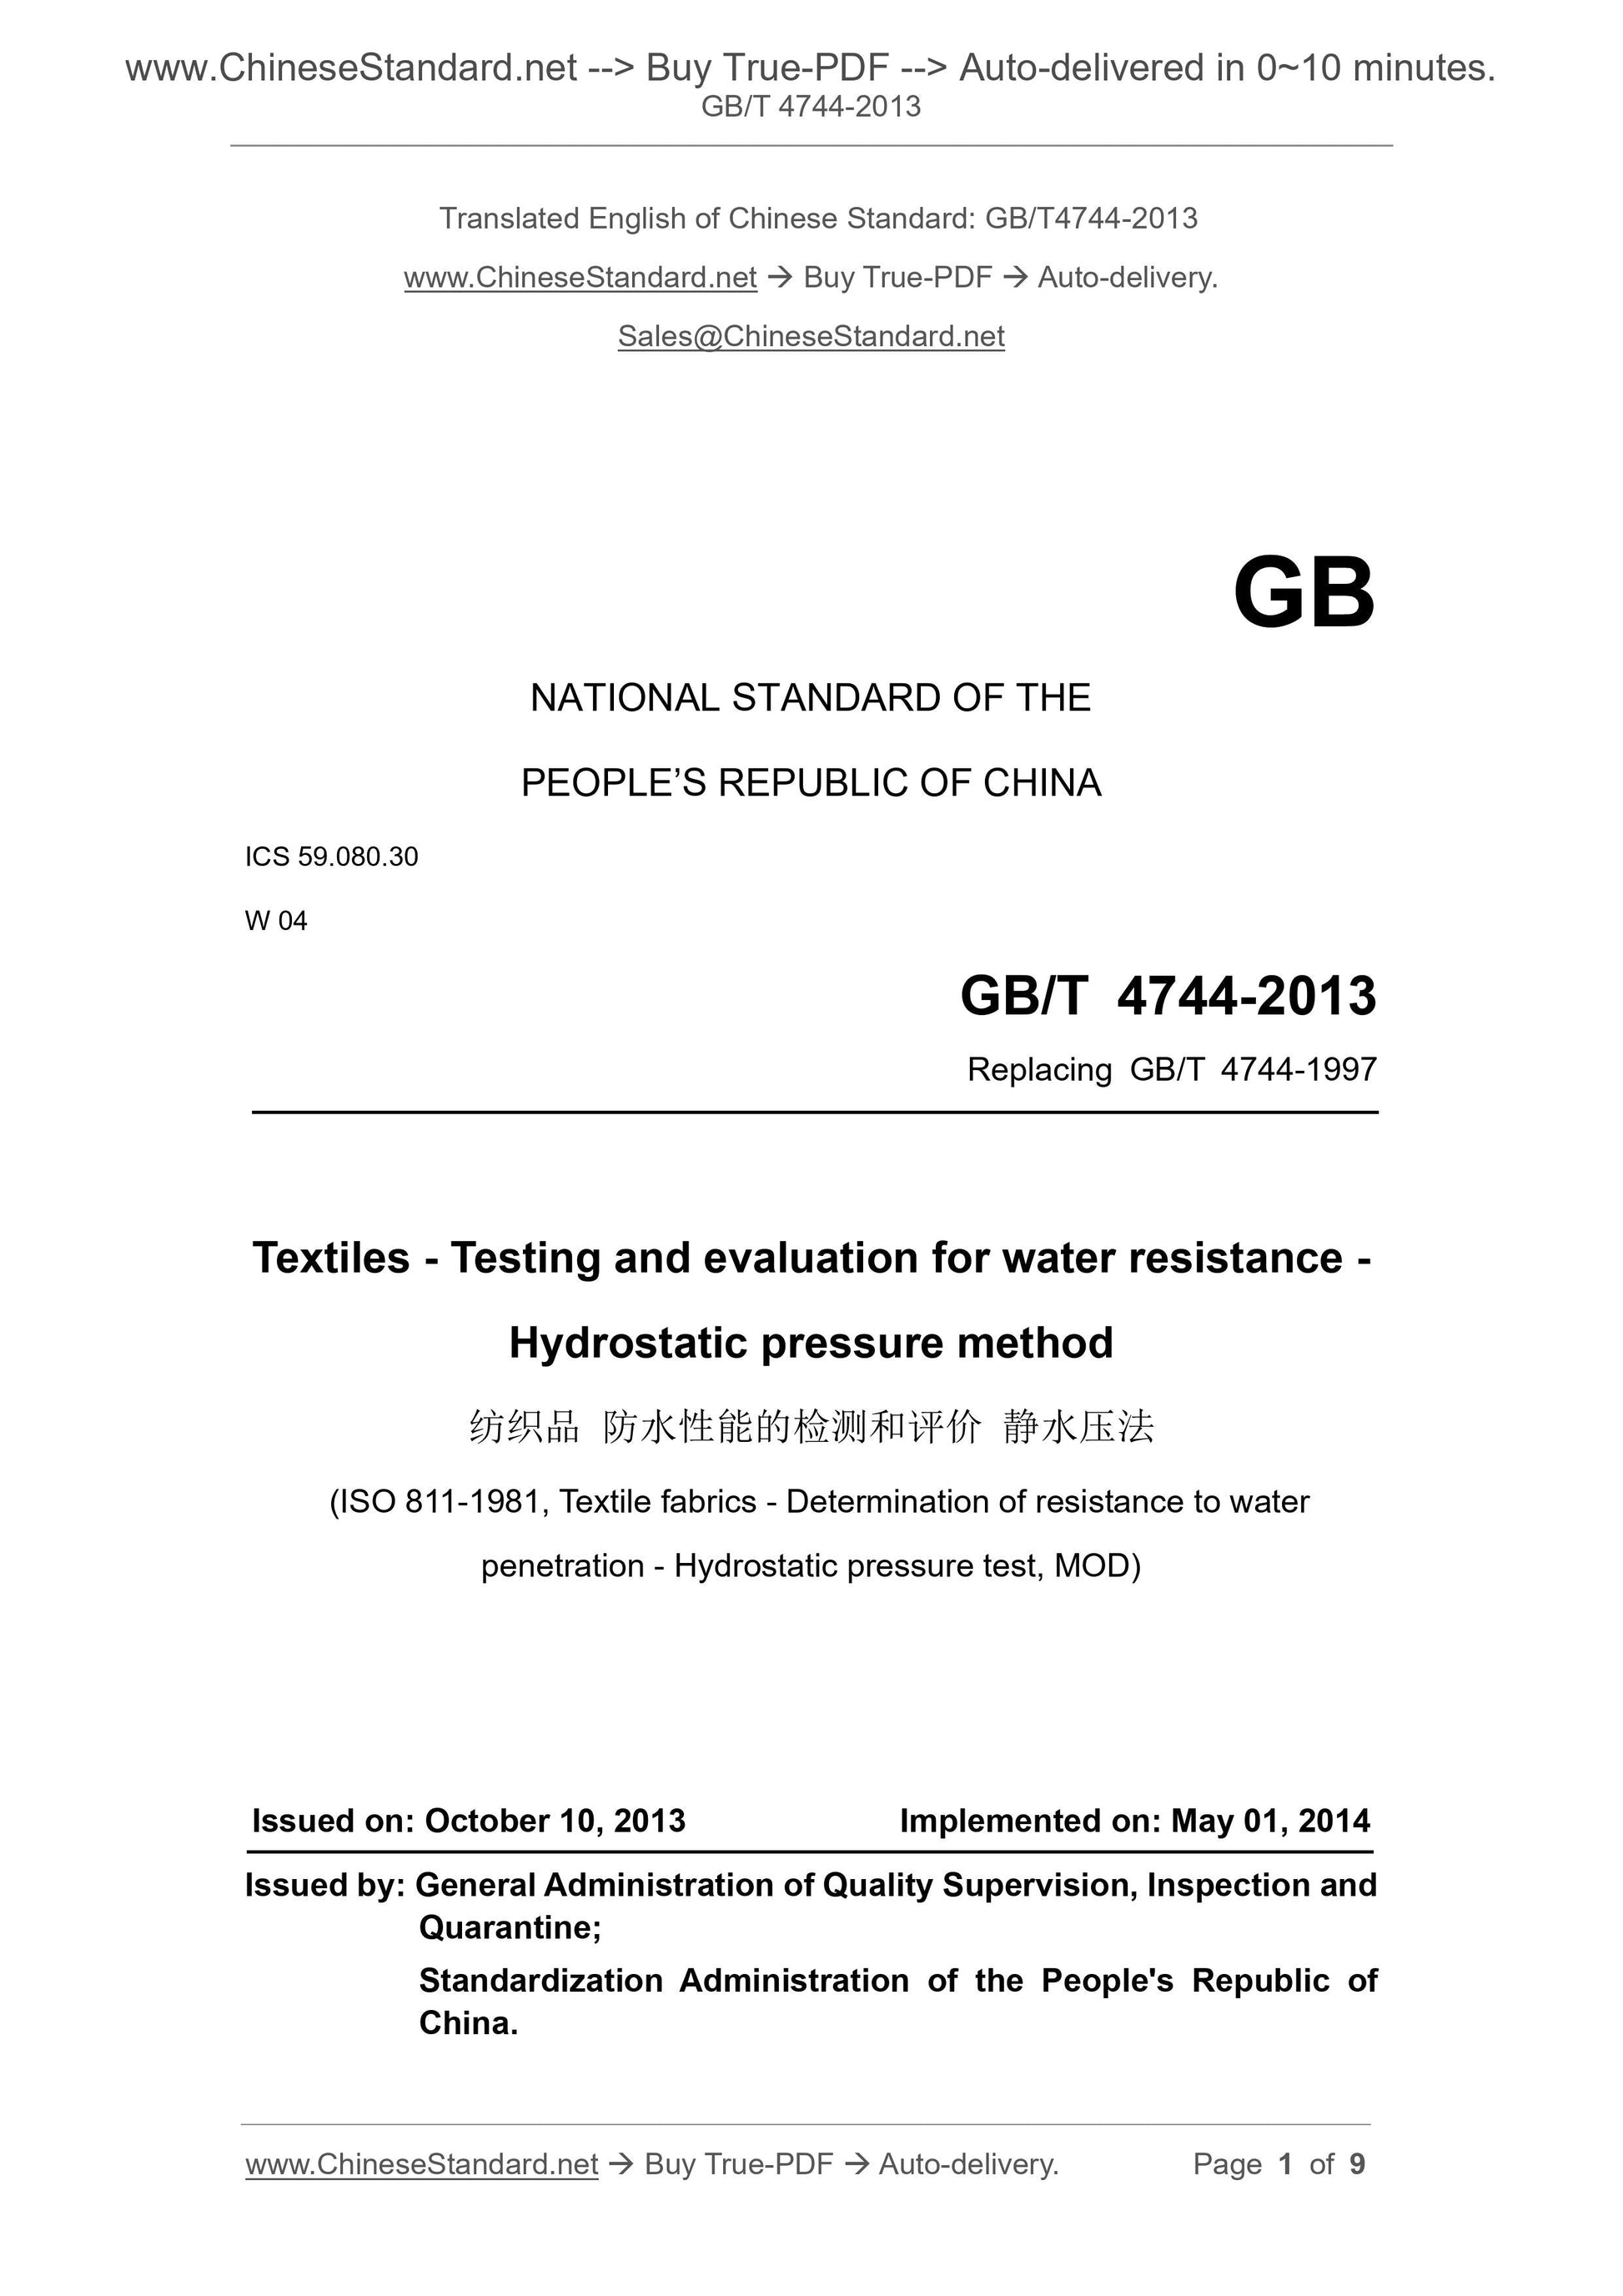 GB/T 4744-2013 Page 1